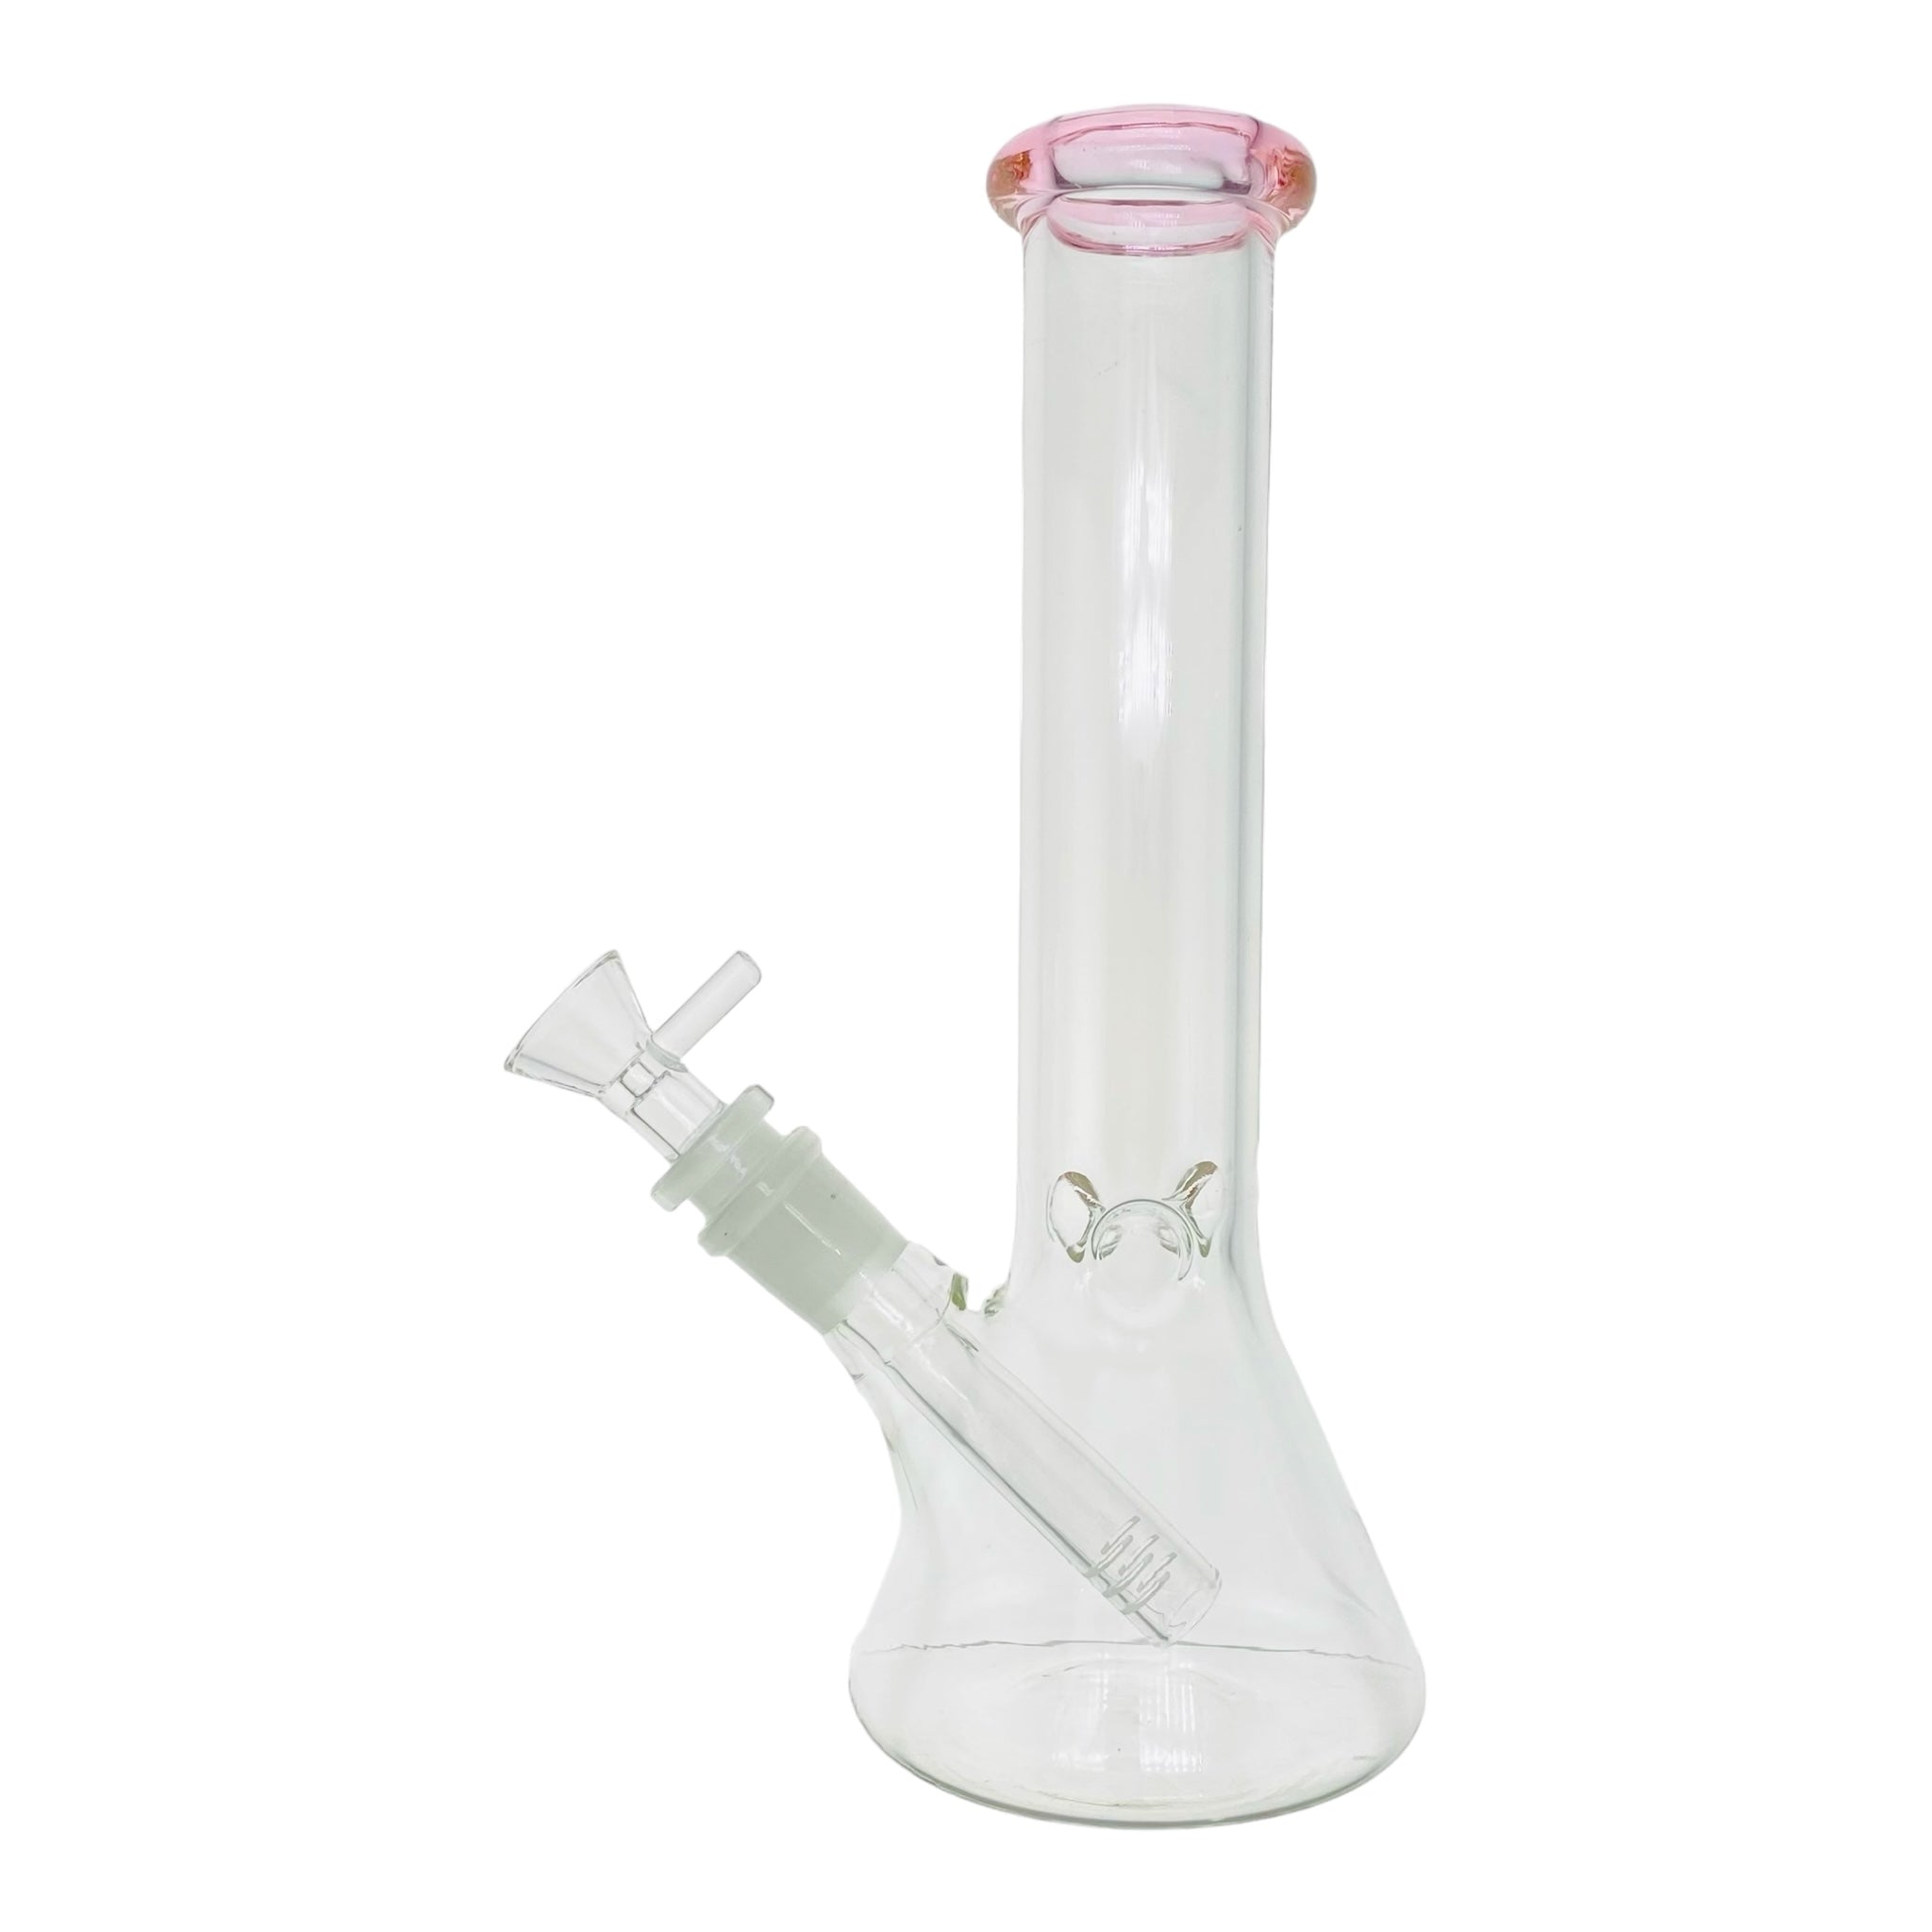 cute pink bong 10 inches tall